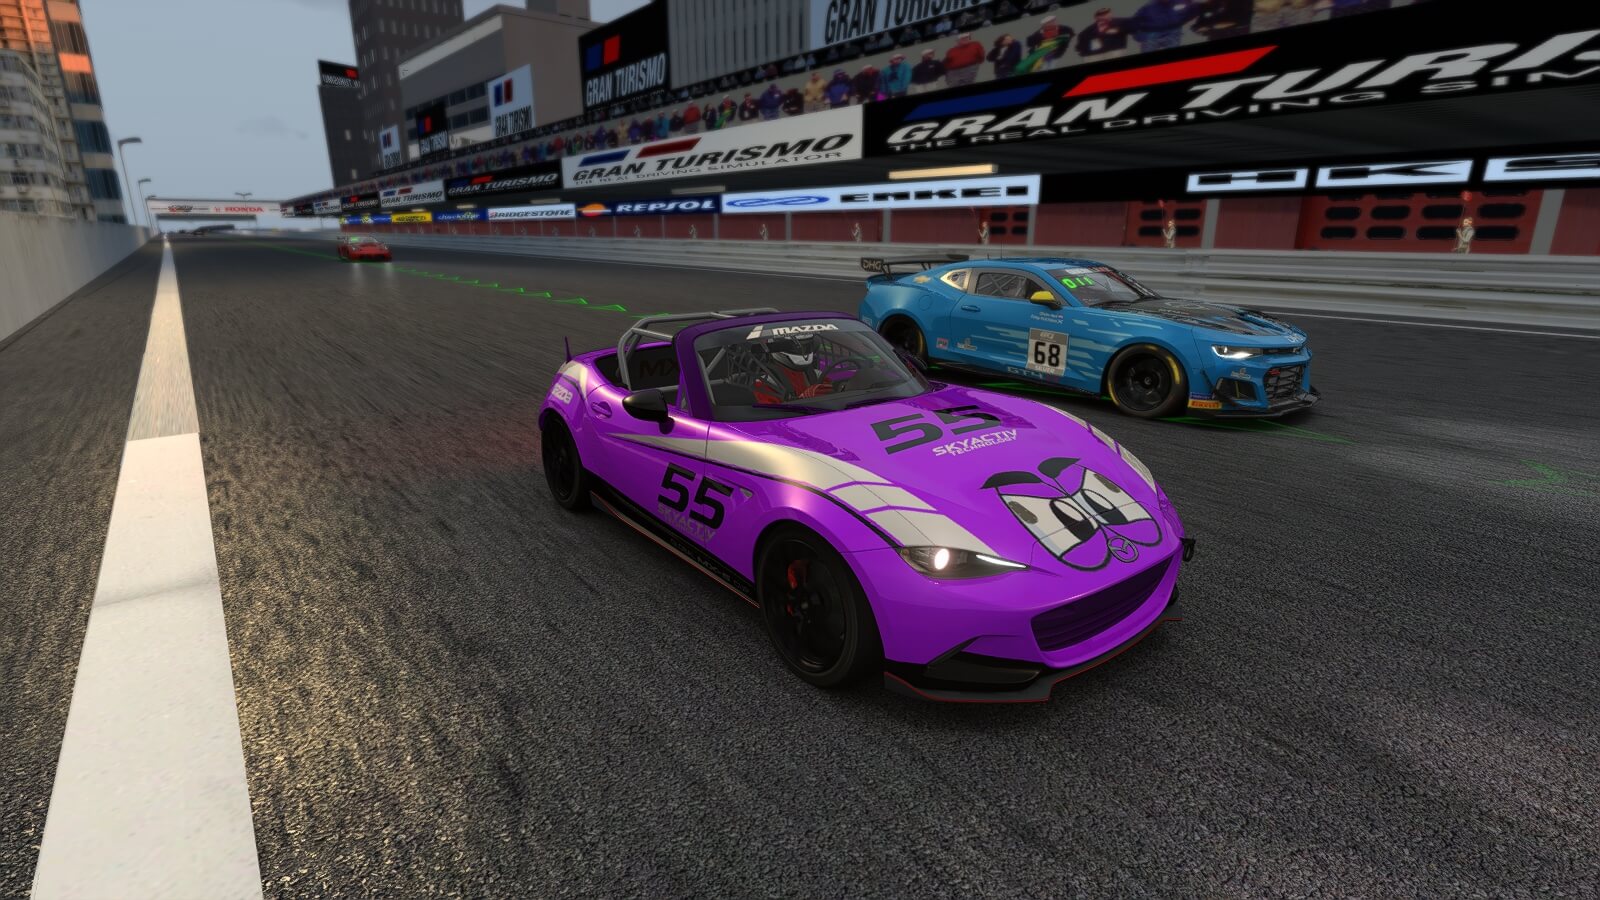 Screenshot_ks_mazda_mx5_cup_s1_special stage route 5_29-6-122-18-14-30.jpg